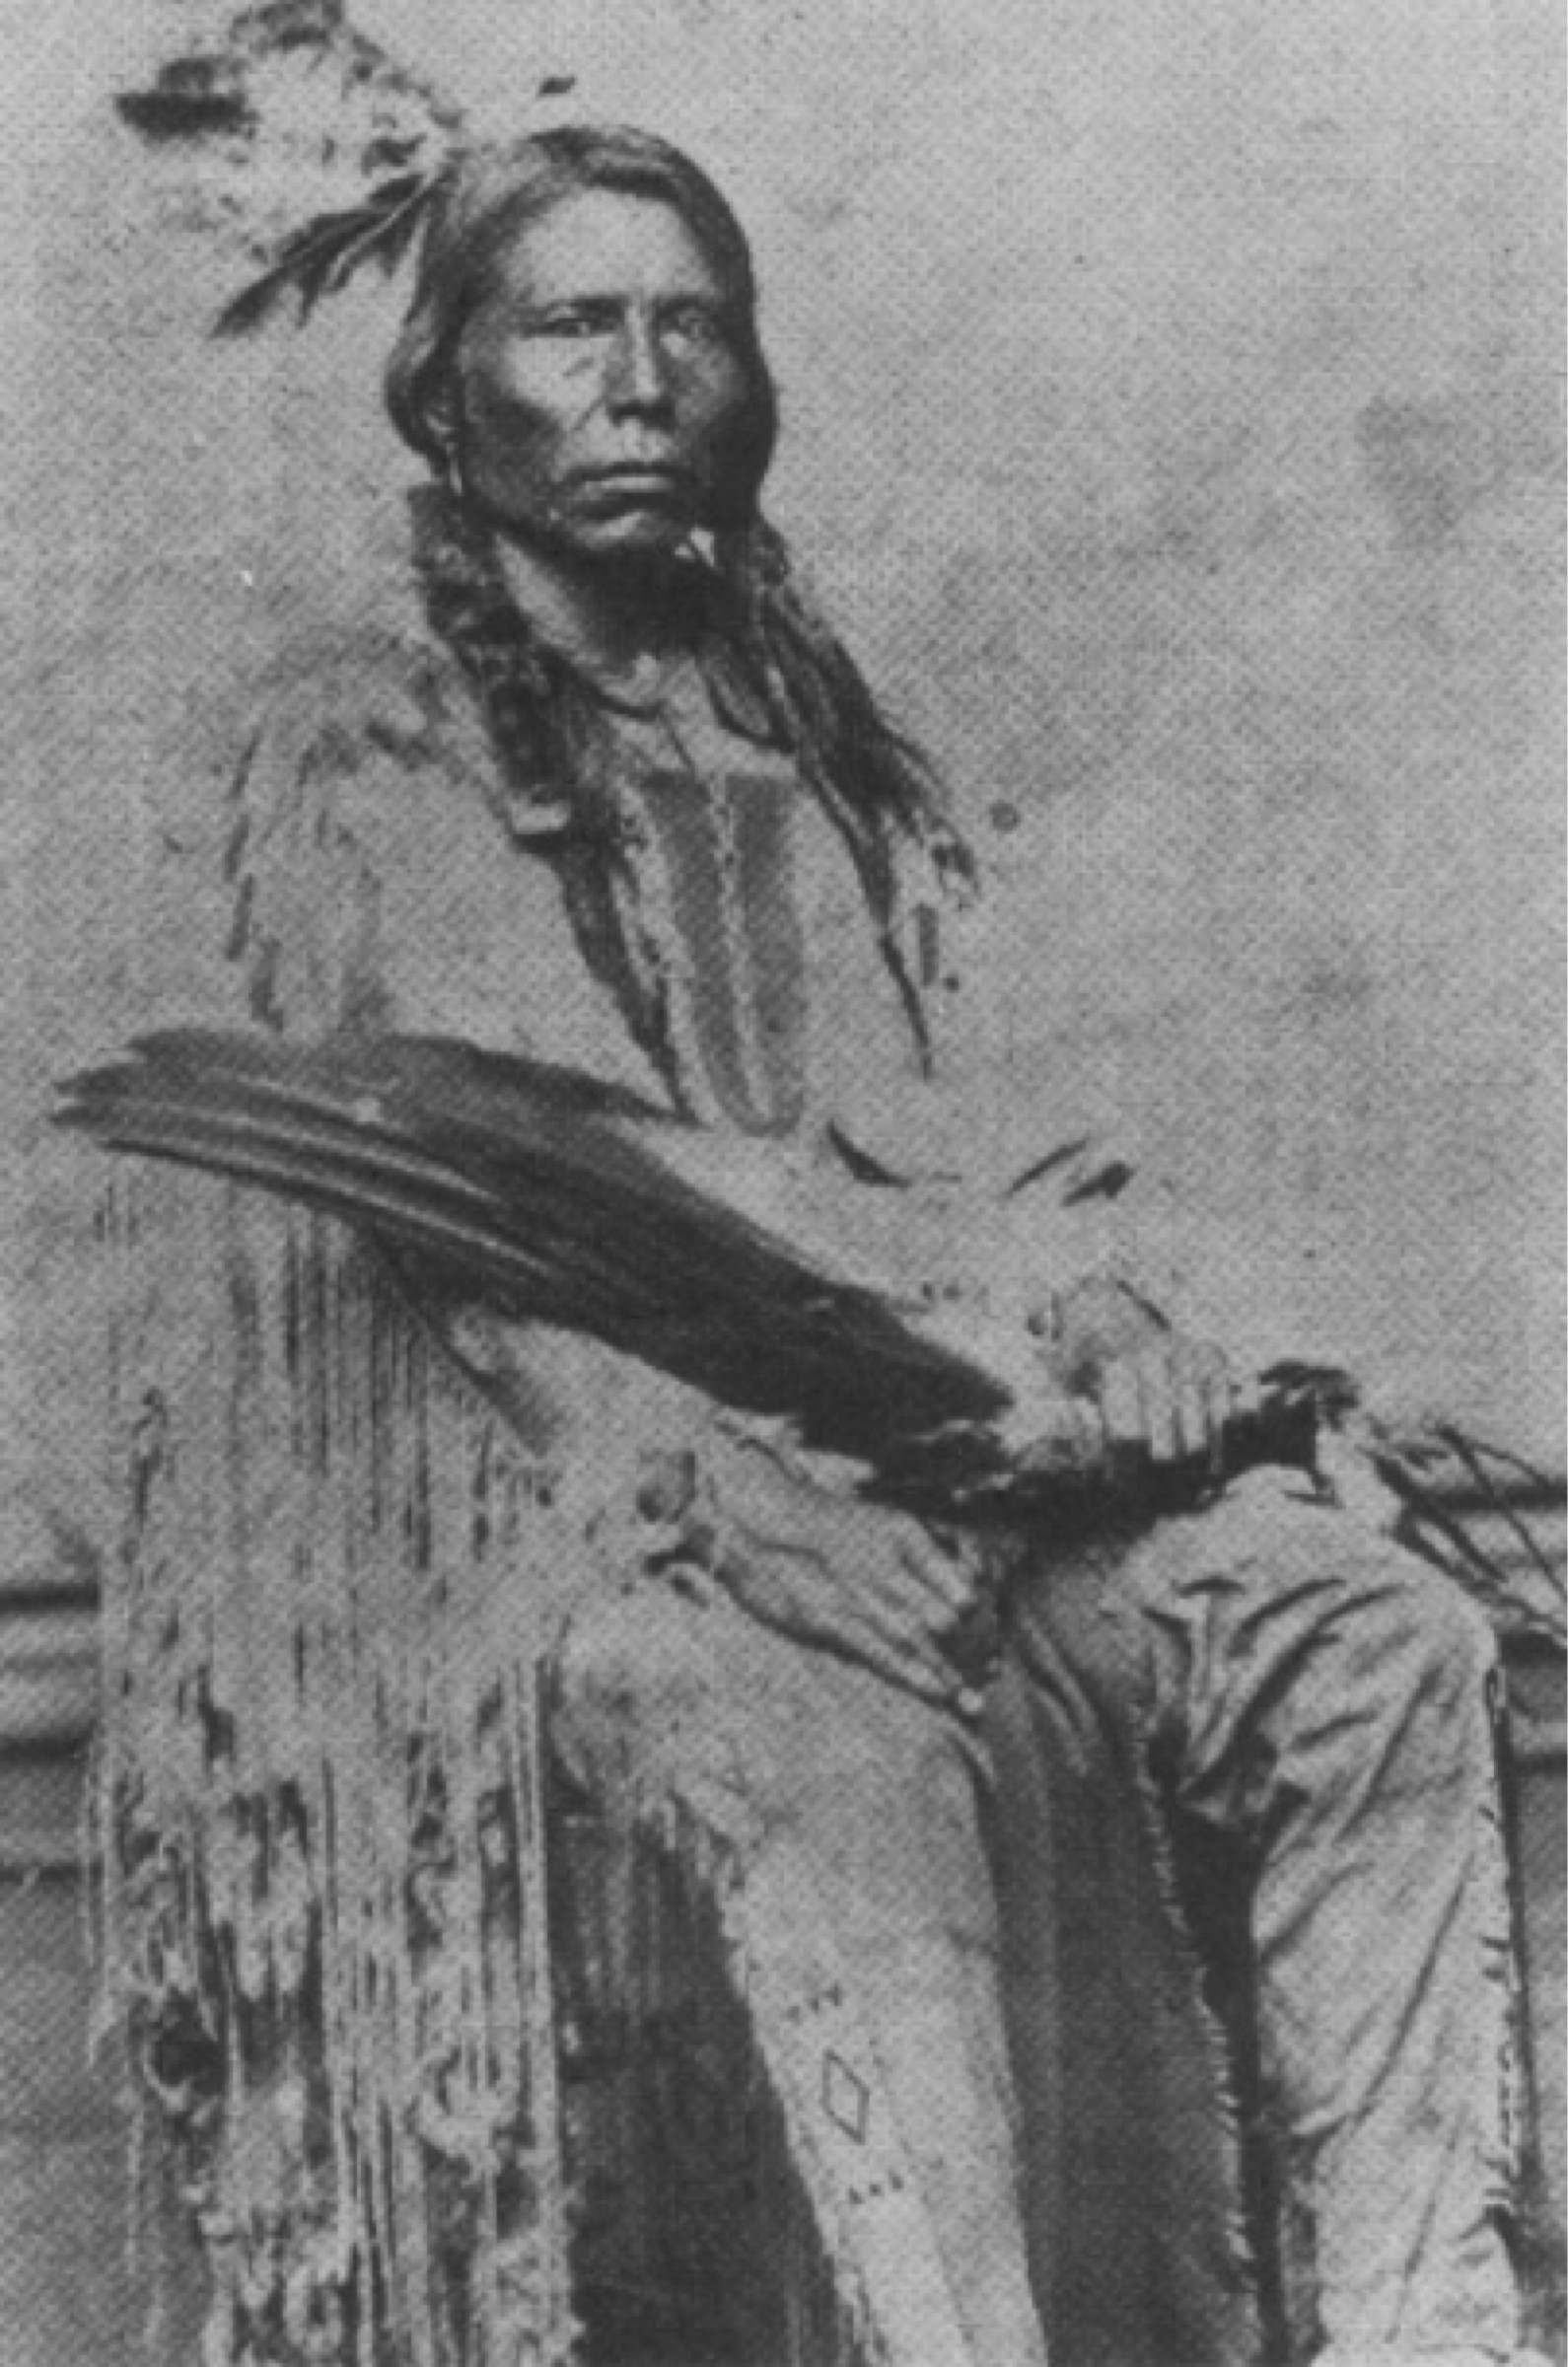 the man named Crazy Horse, sitting, he has long hair, and is wearing traditional dress.